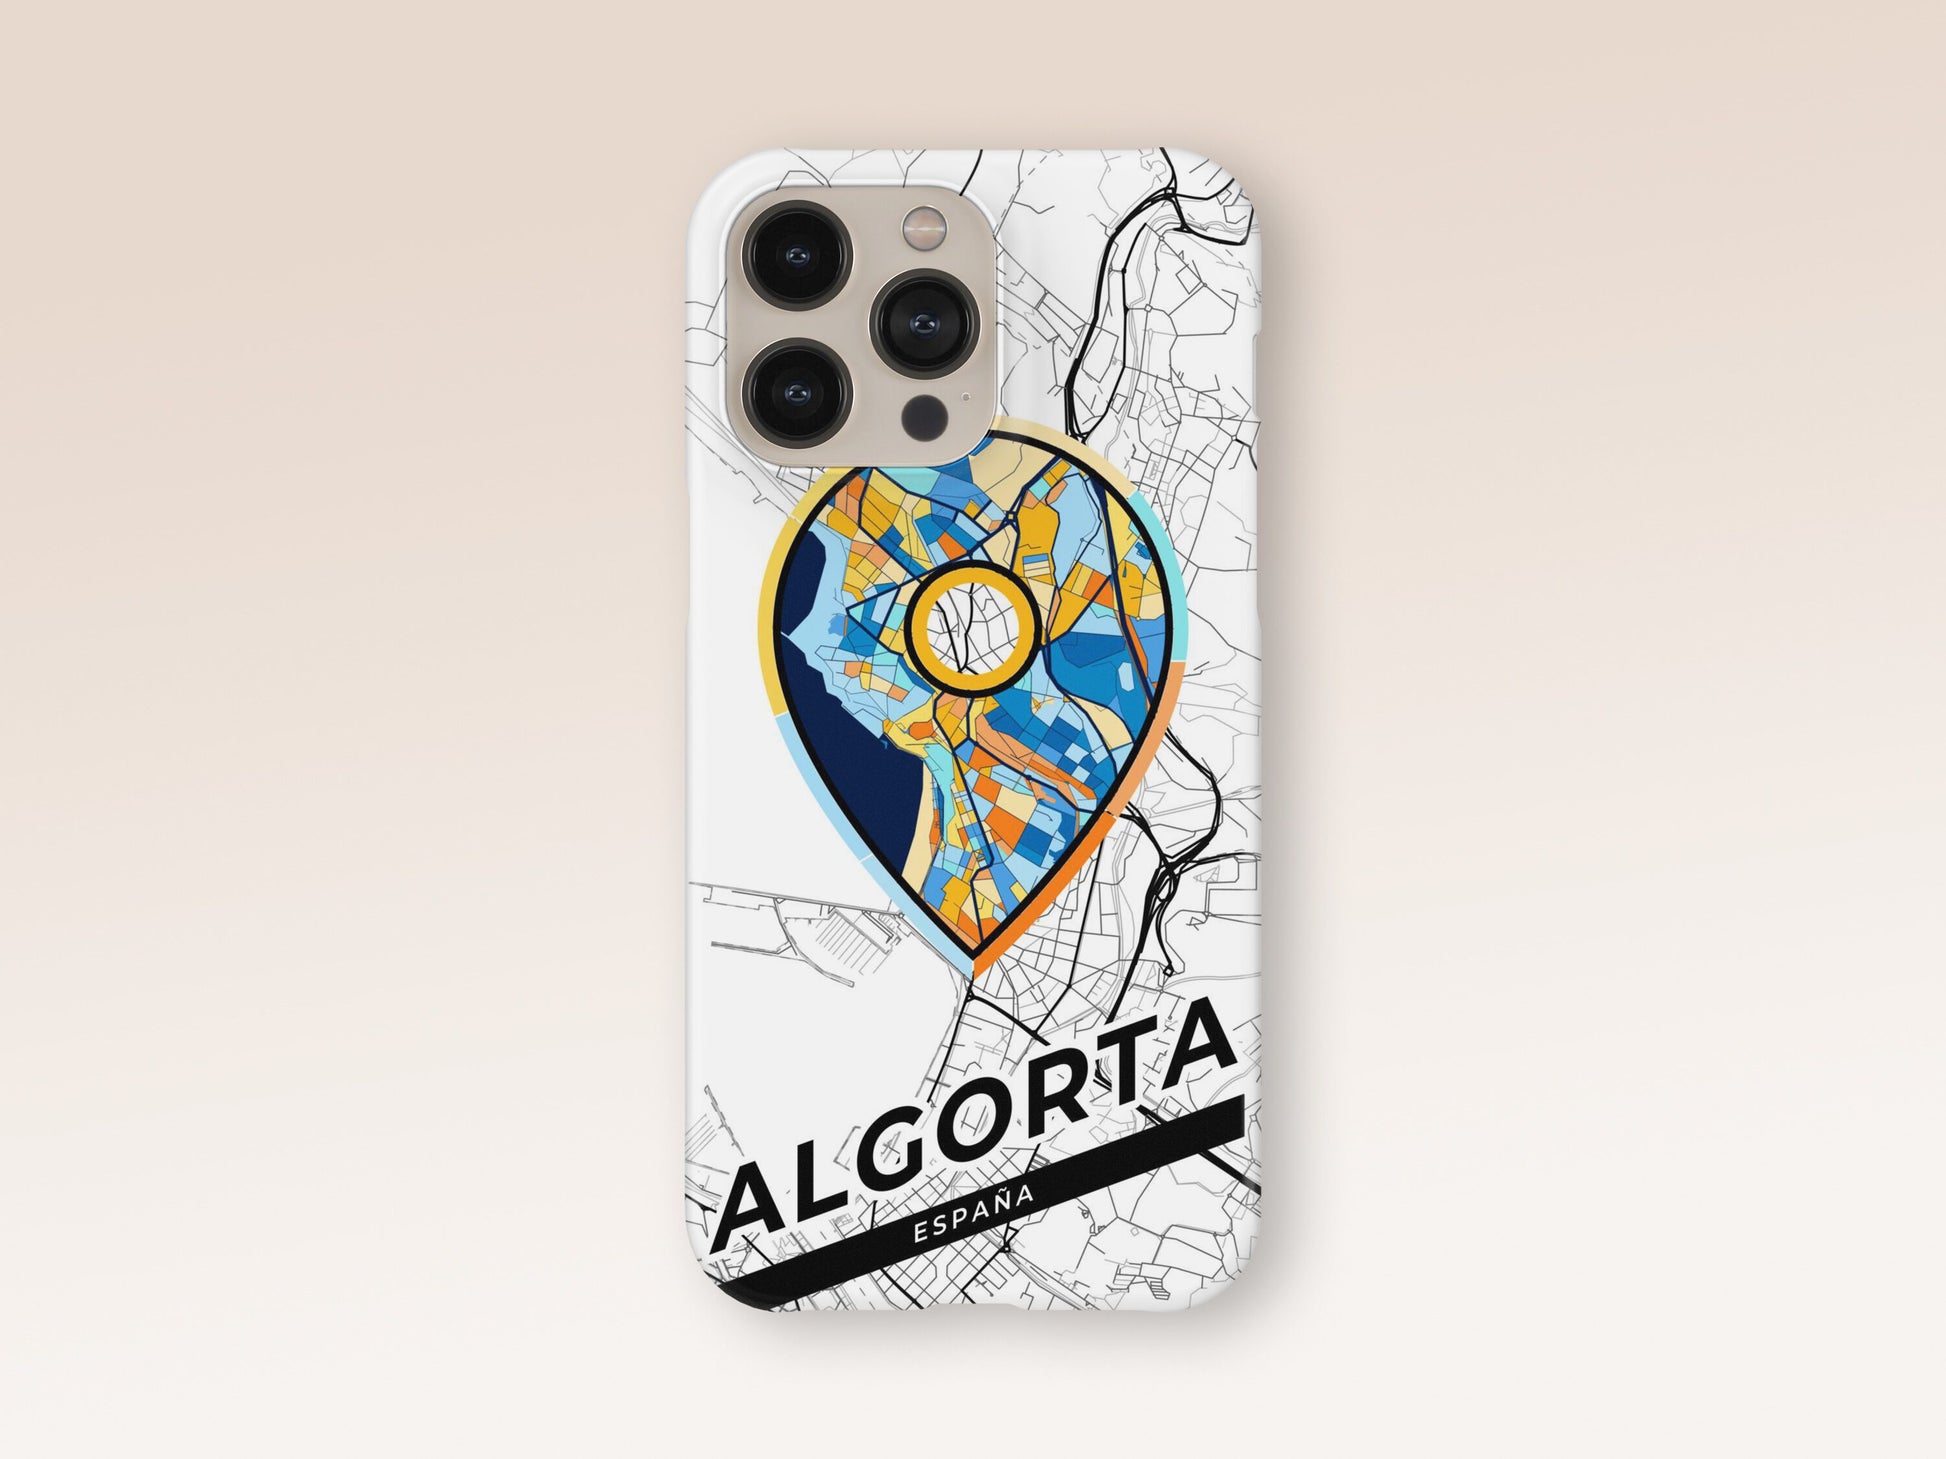 Algorta Spain slim phone case with colorful icon. Birthday, wedding or housewarming gift. Couple match cases. 1